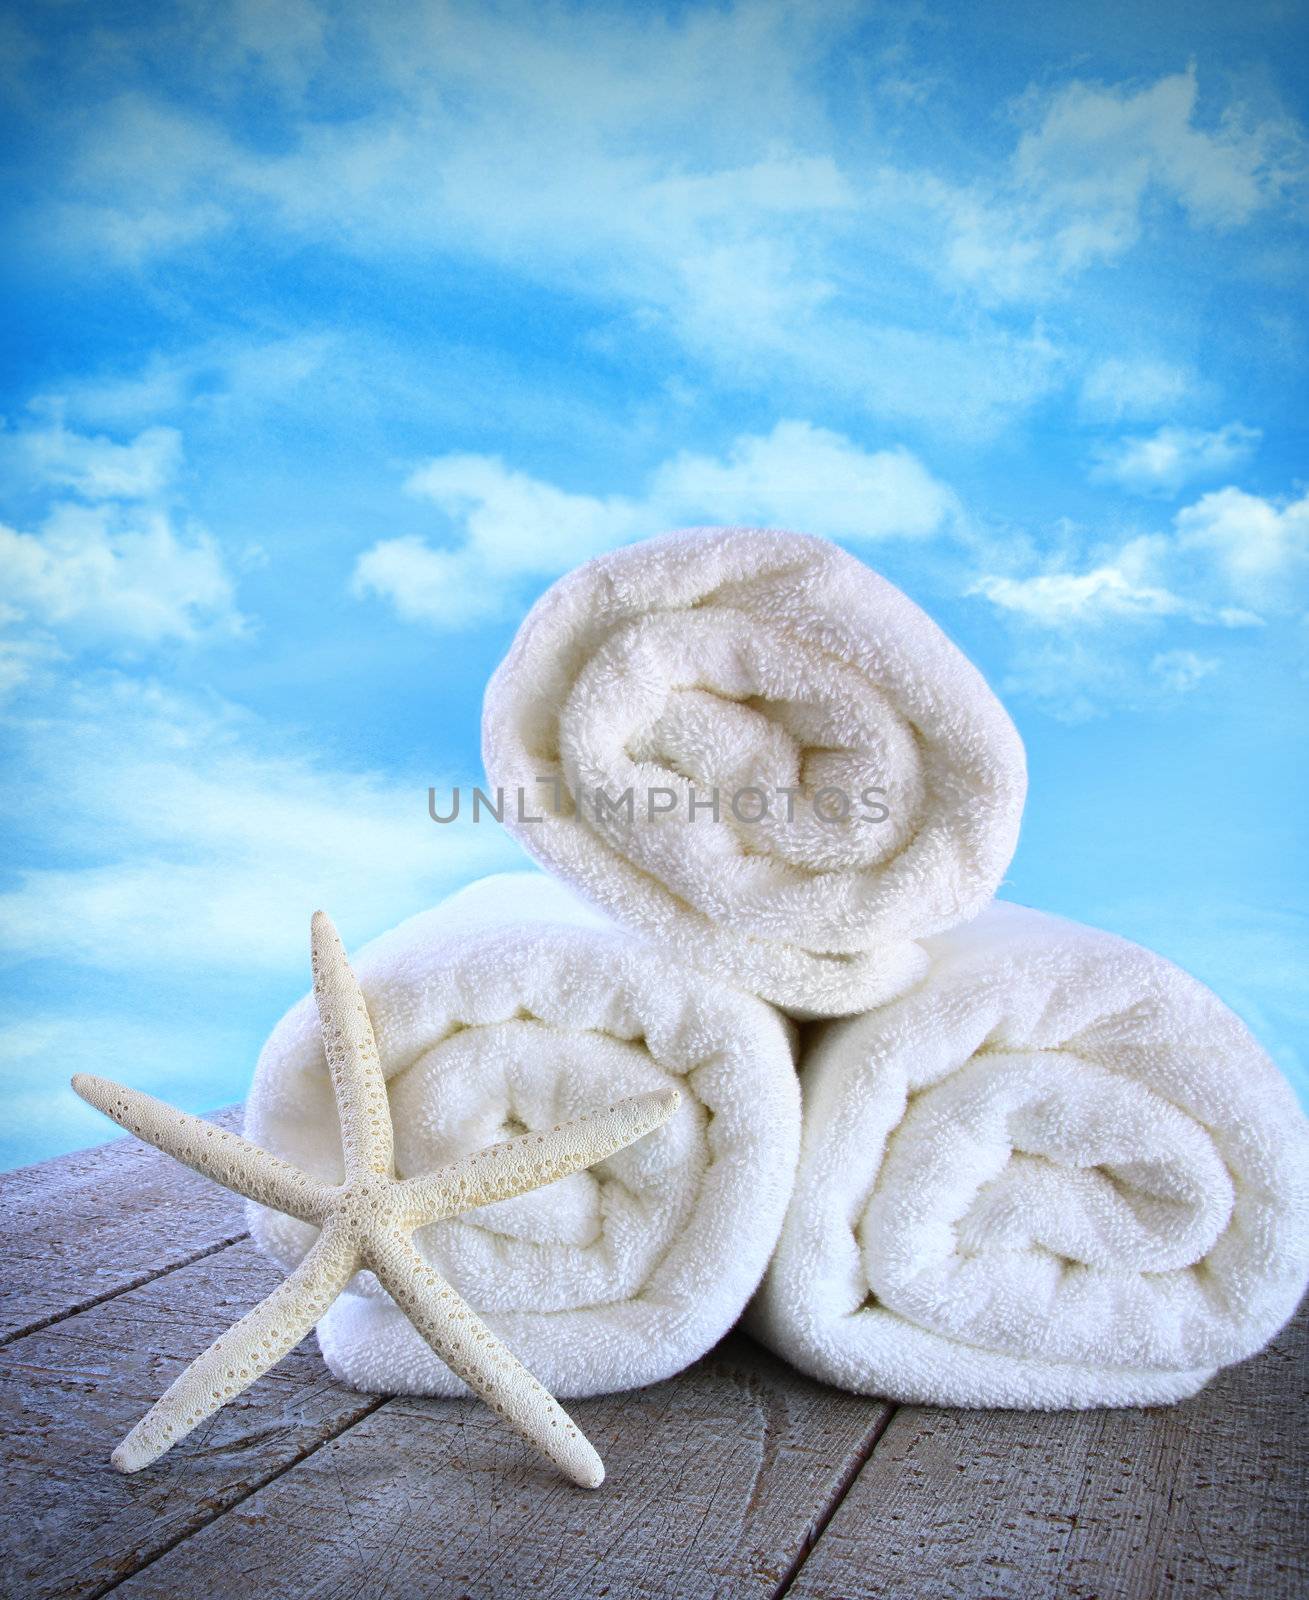 Fluffy fresh towels against a blue sky by Sandralise